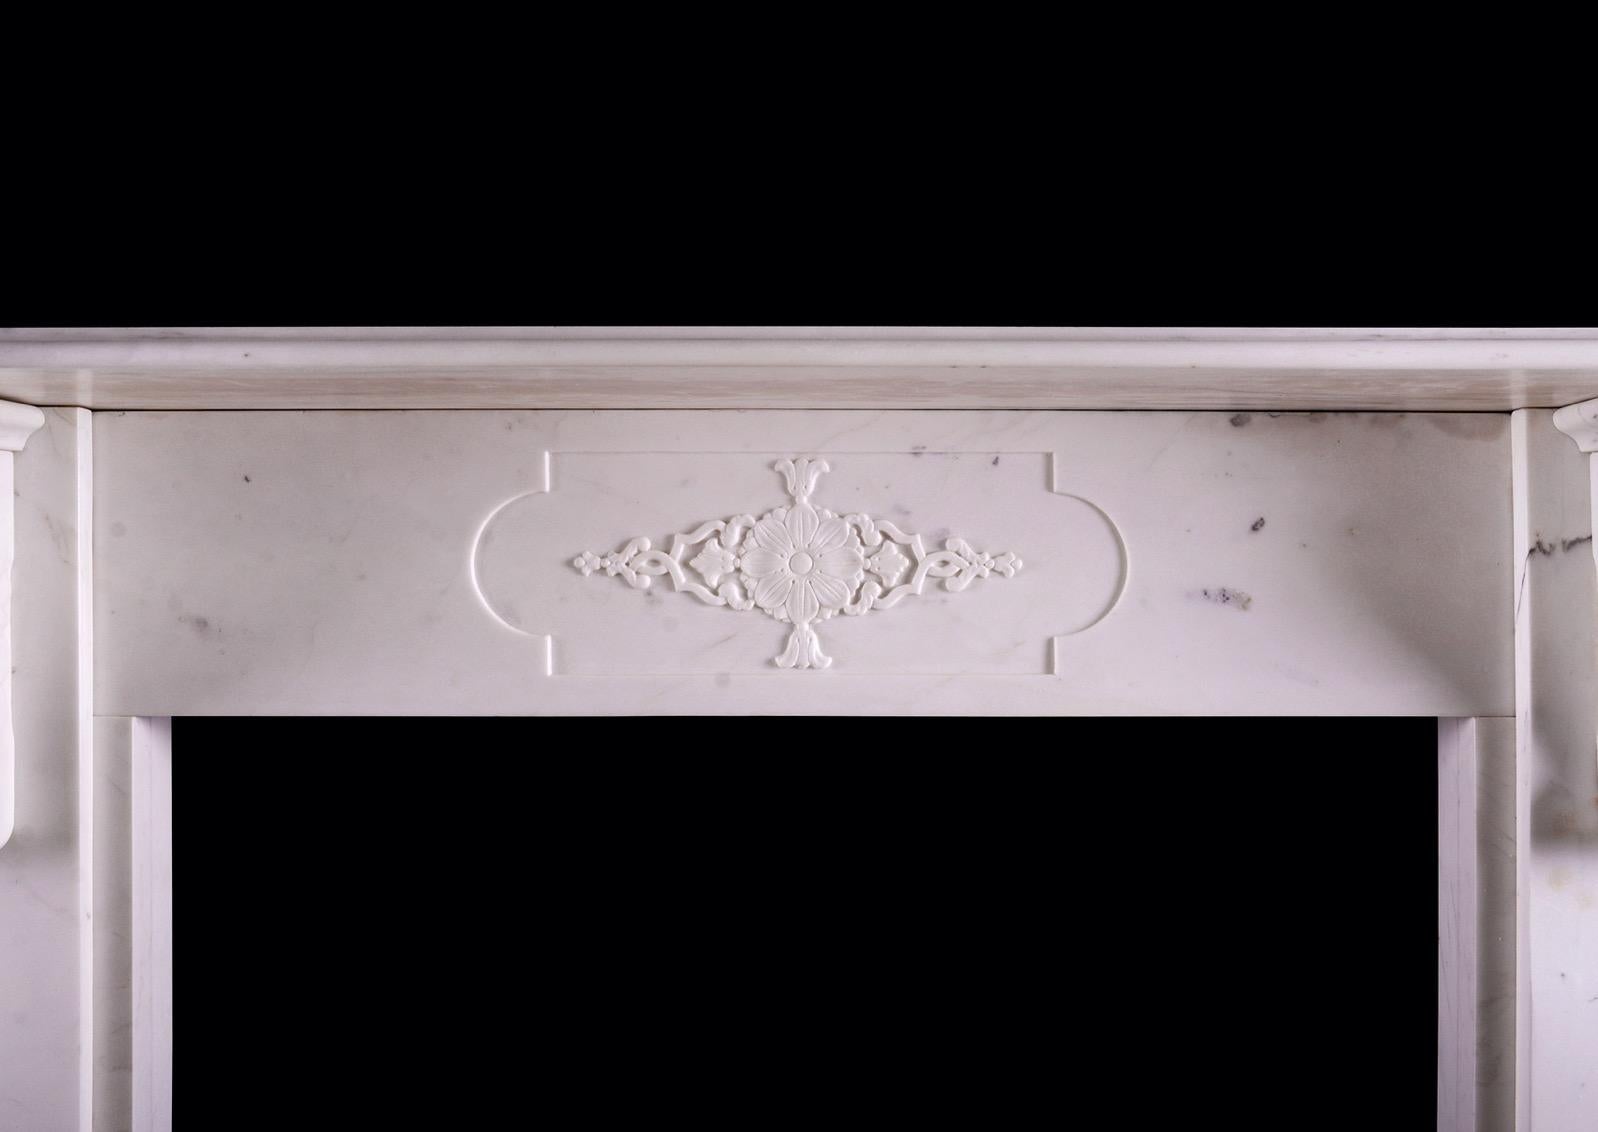 A good quality period Victorian fireplace in Statuary white marble. The jambs with corbels featuring acanthus leaves with decorative panels below. The frieze with centre panel carved with rosette and bellflower detailing. Moulded shelf above.